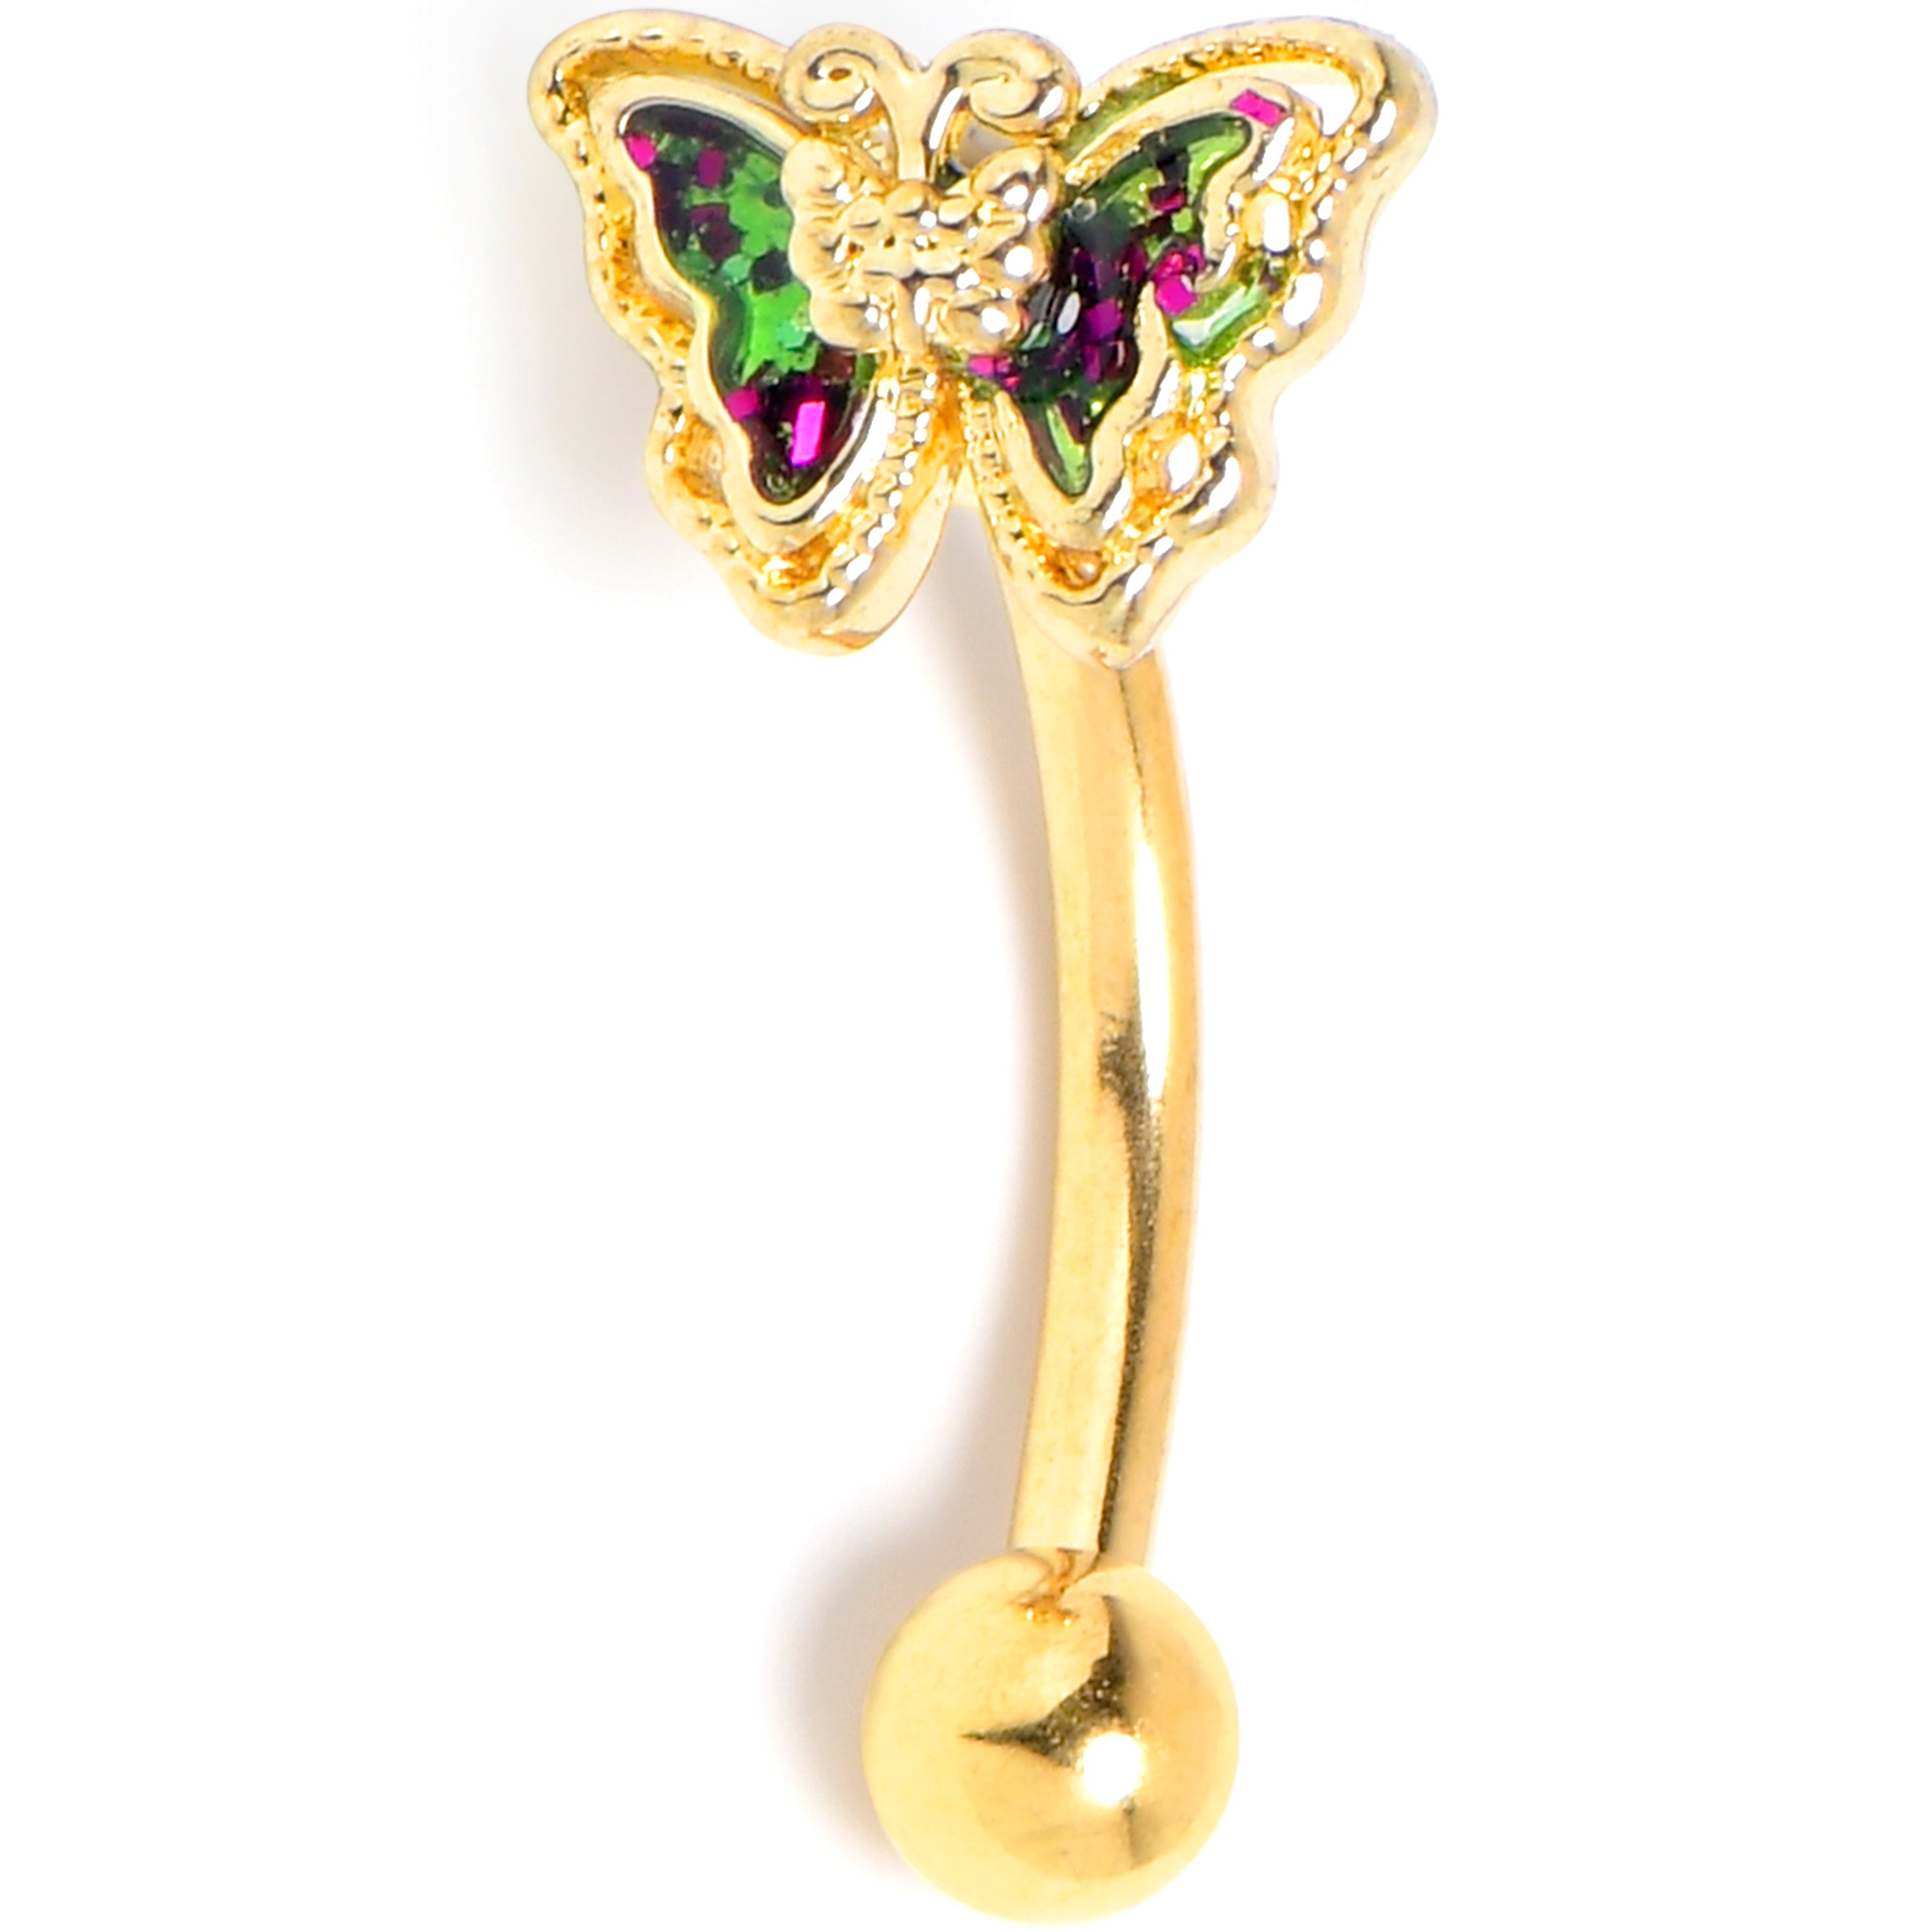 16 Gauge 5/16 Vitrail Gem Gold Tone Classic Butterfly Curved Eyebrow Ring